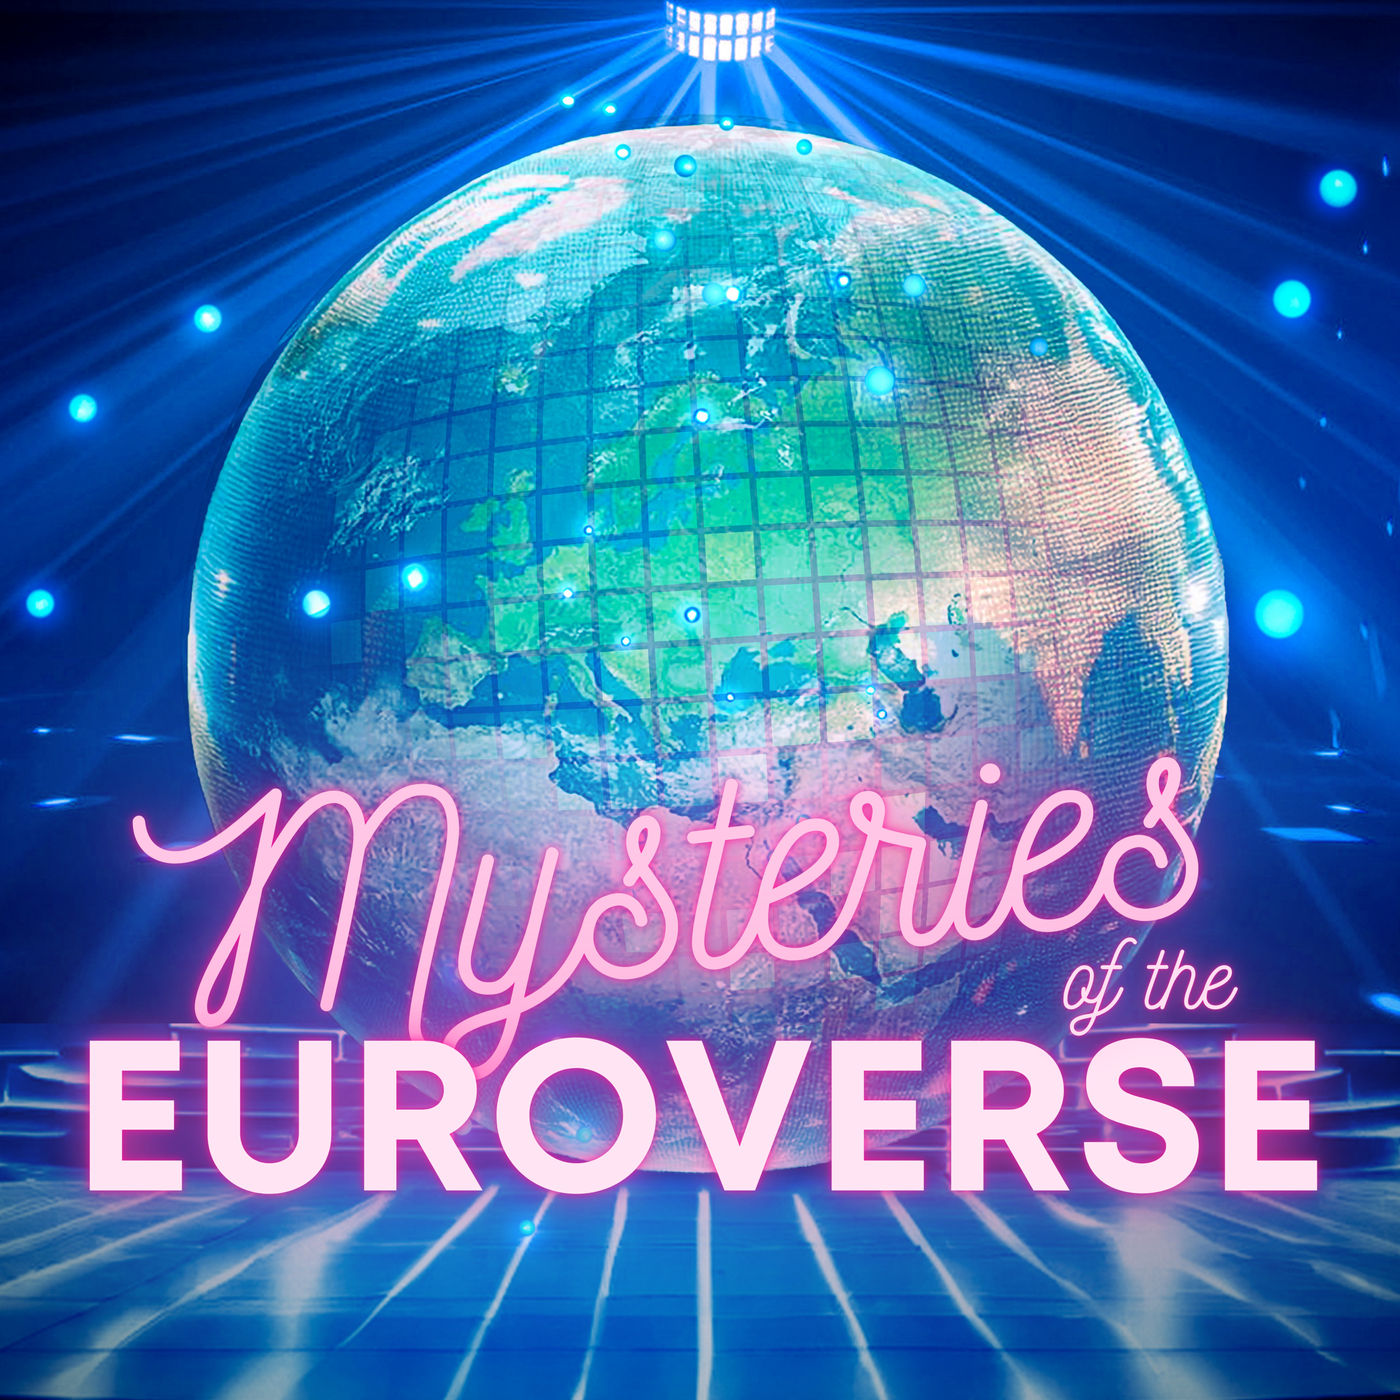 Mysteries of the Euroverse!